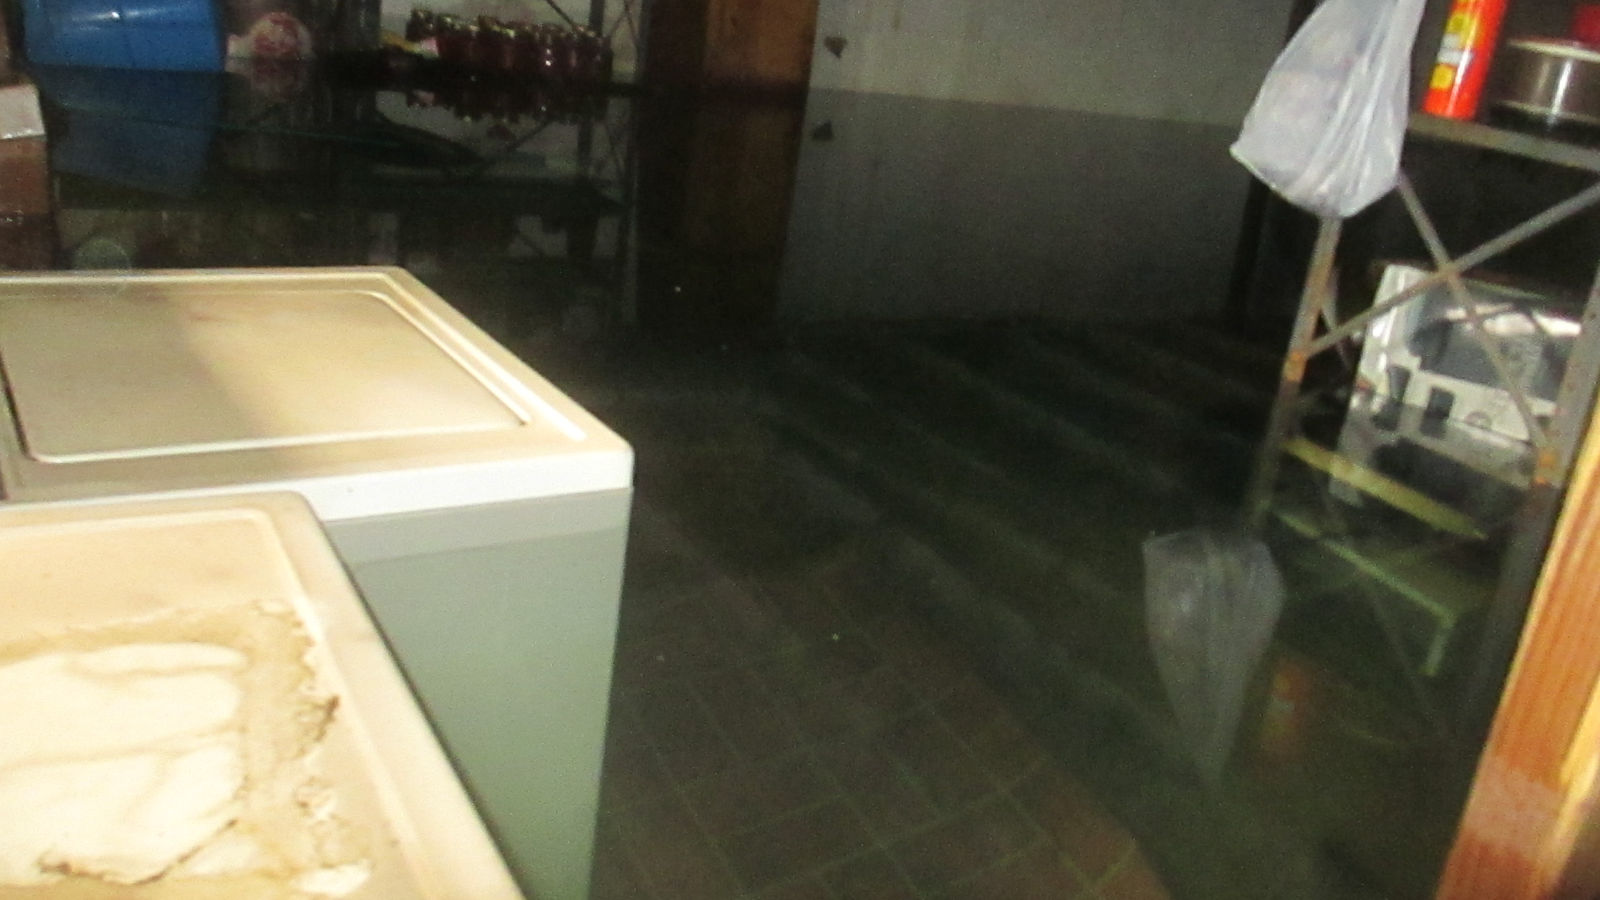 Flooded basement, nearly to top of washing machine